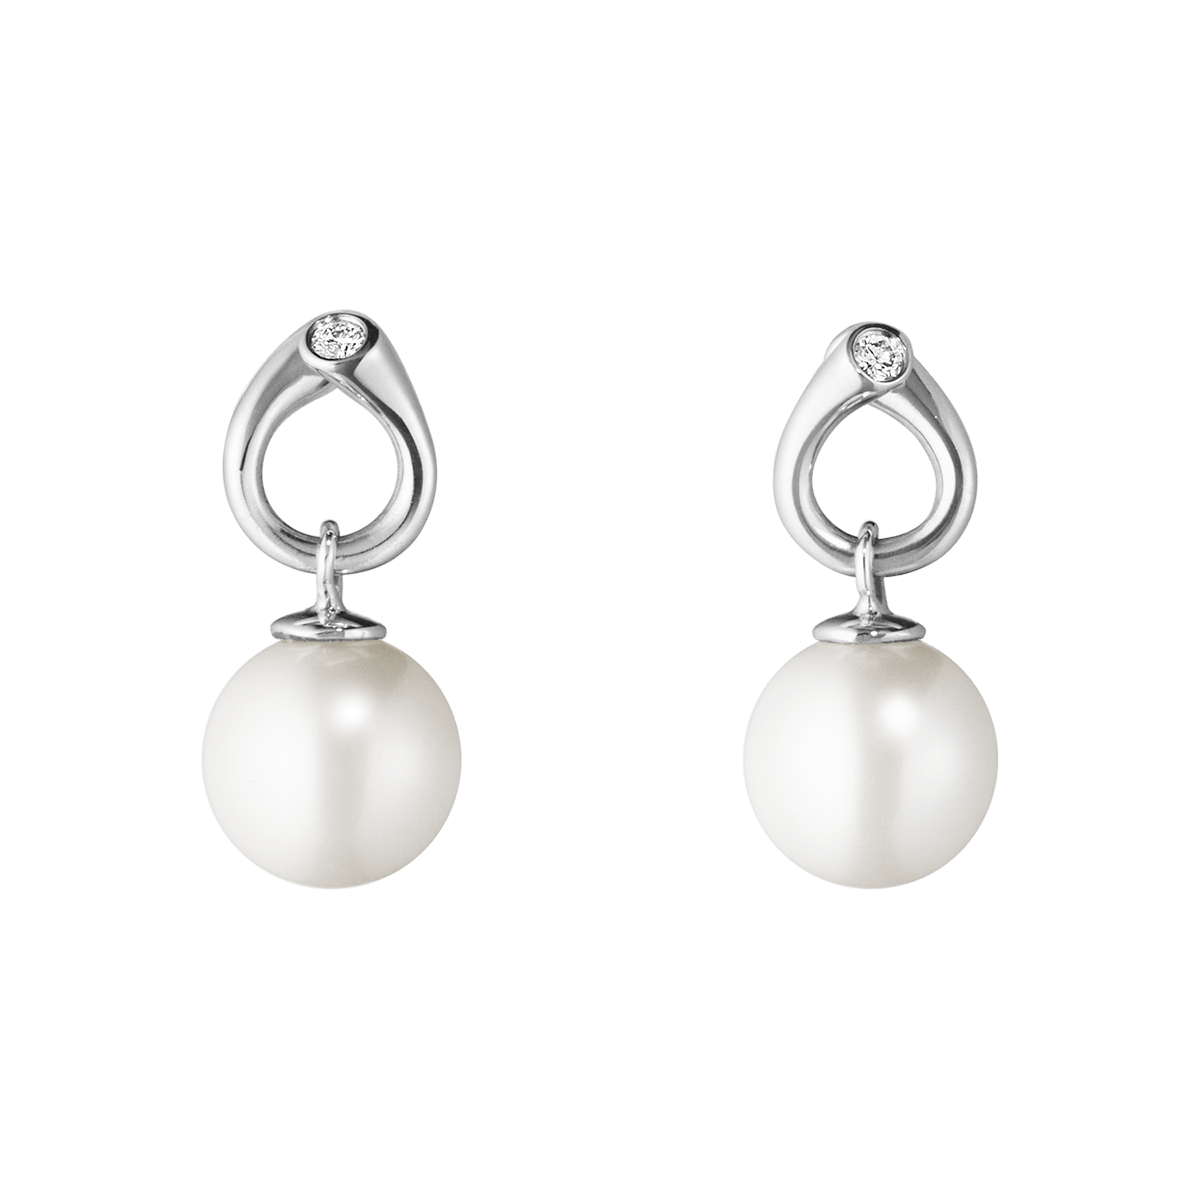 https://res.cloudinary.com/georgjensen/image/upload/f_auto,dpr_2/w_auto,c_scale/products/images/hi-res/3519817-MAGIC-earrings-pearl-diamond-white-gold?_i=AG